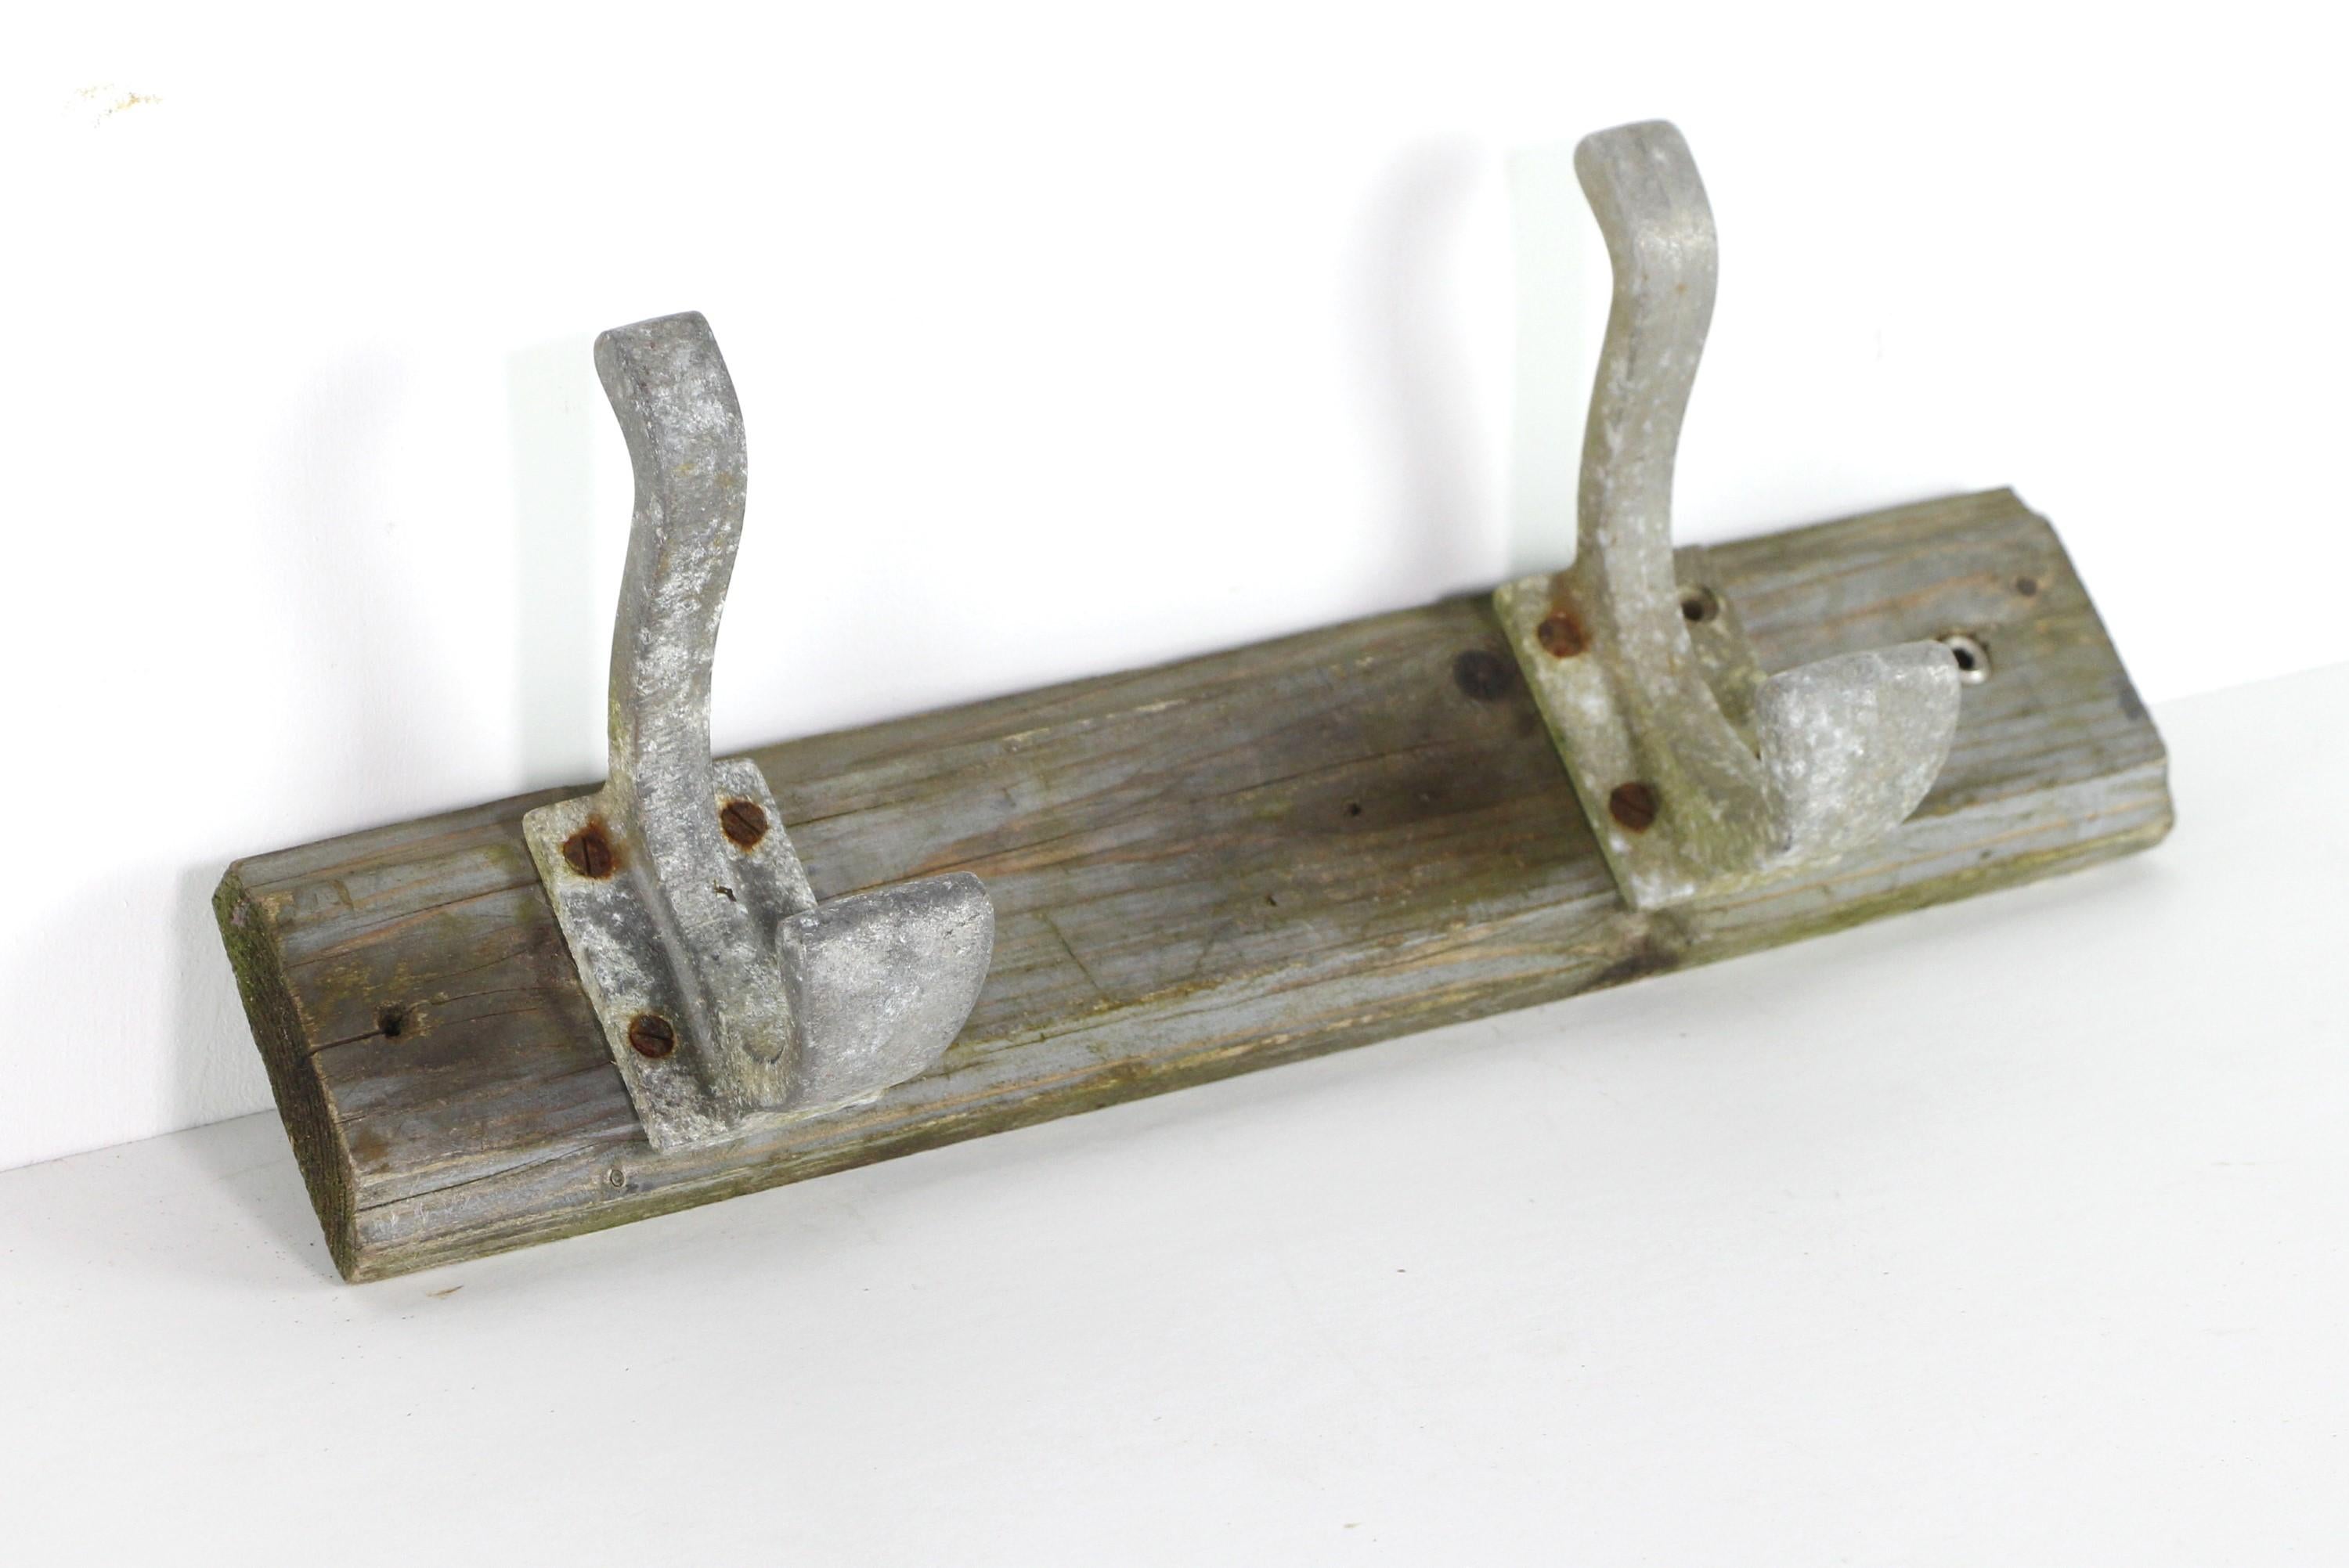 Two original Mid-Century Modern aluminum hooks mounted on a driftwood stained wood plank. Great for hats and coats. Please note, this item is located in our Scranton, PA location.